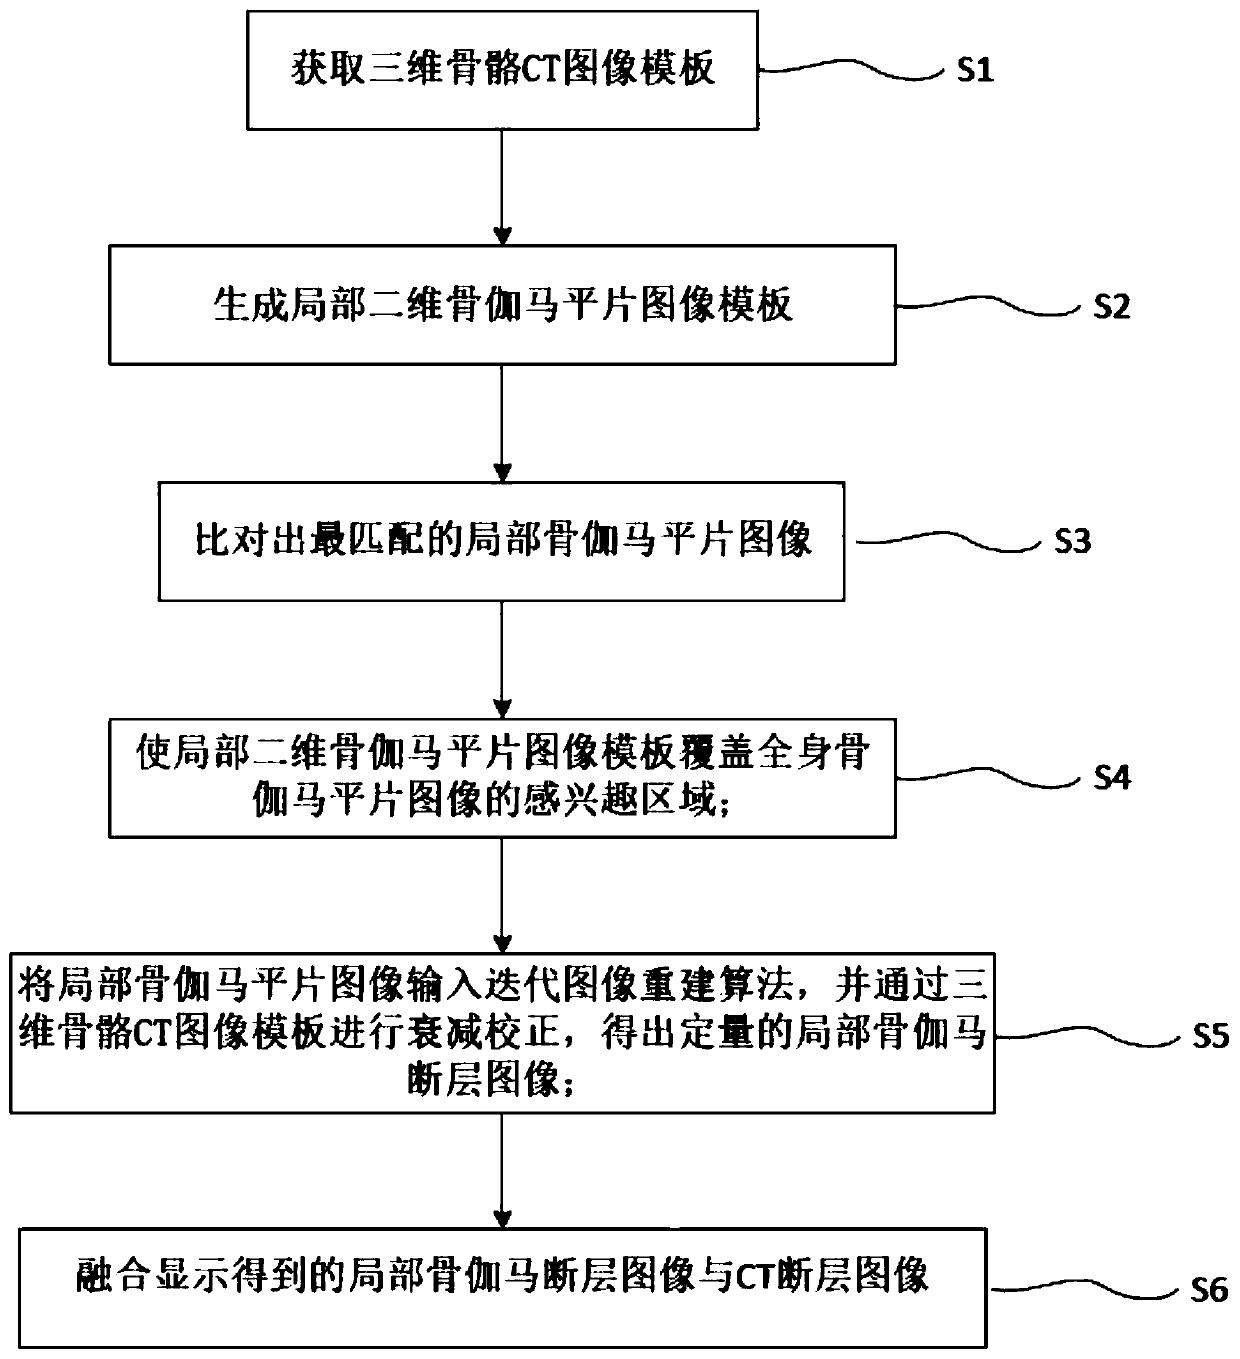 Bone fault image reconstruction method and system